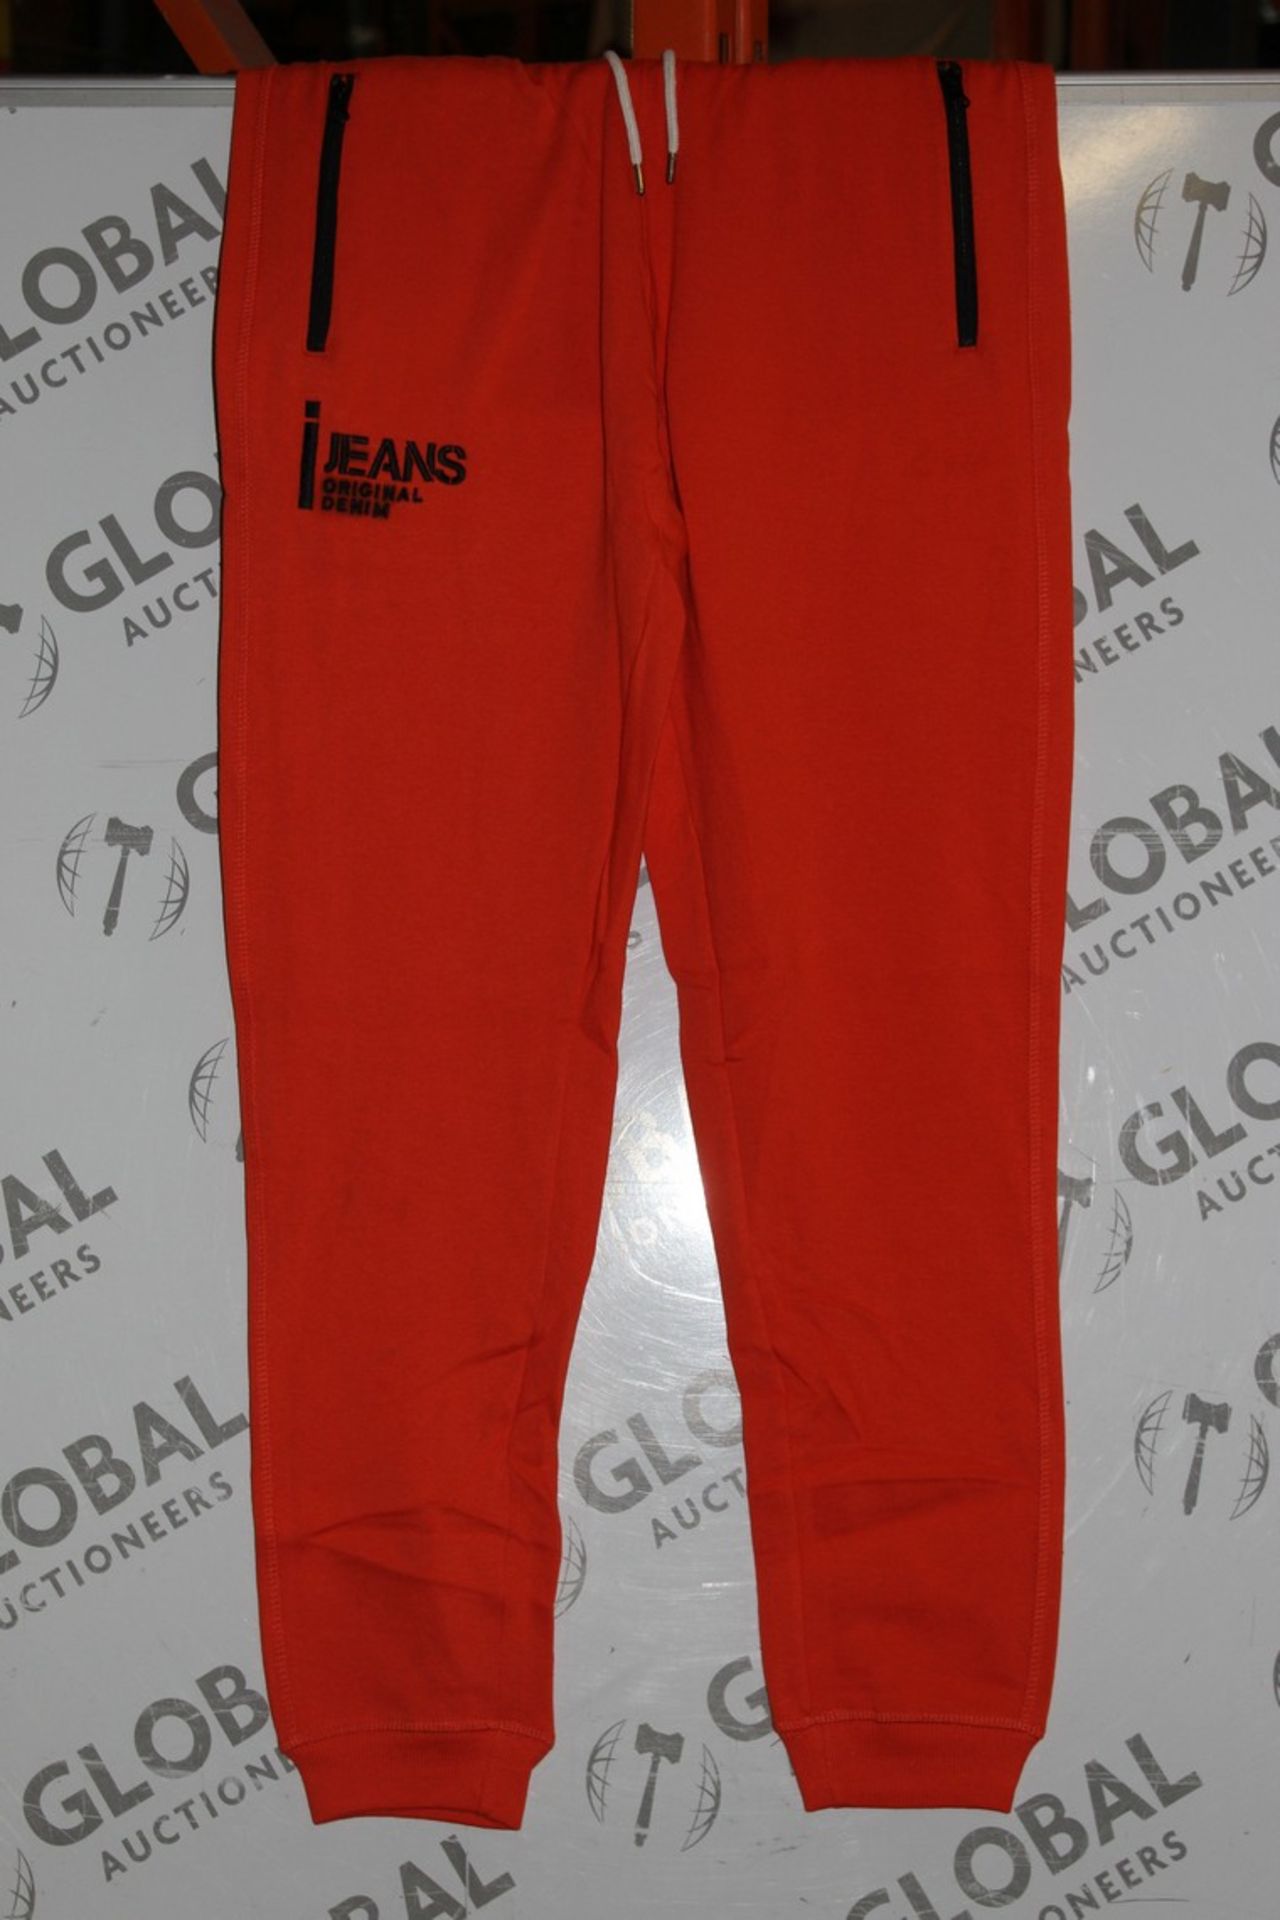 Lot to Contain 20 Brand New Pairs of Ijeans Original Denim Orange Zip Pocket Trousers in Assorted